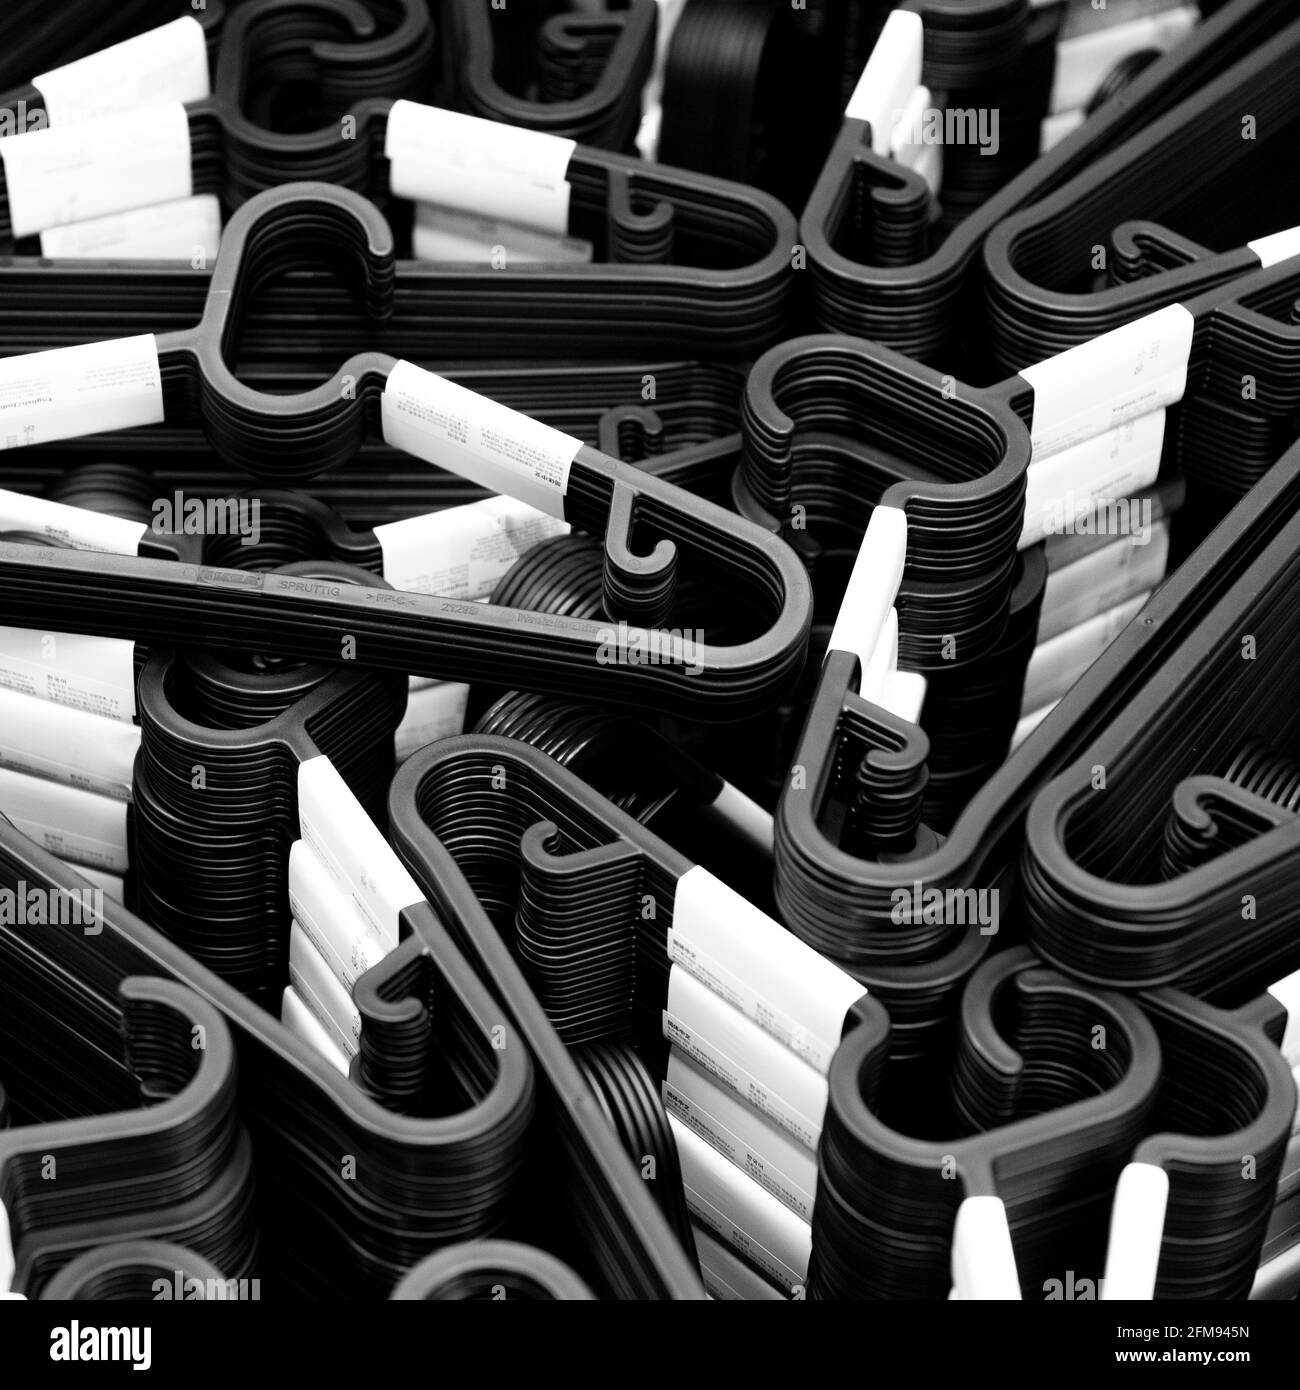 Stacking of plastic hangers background Stock Photo